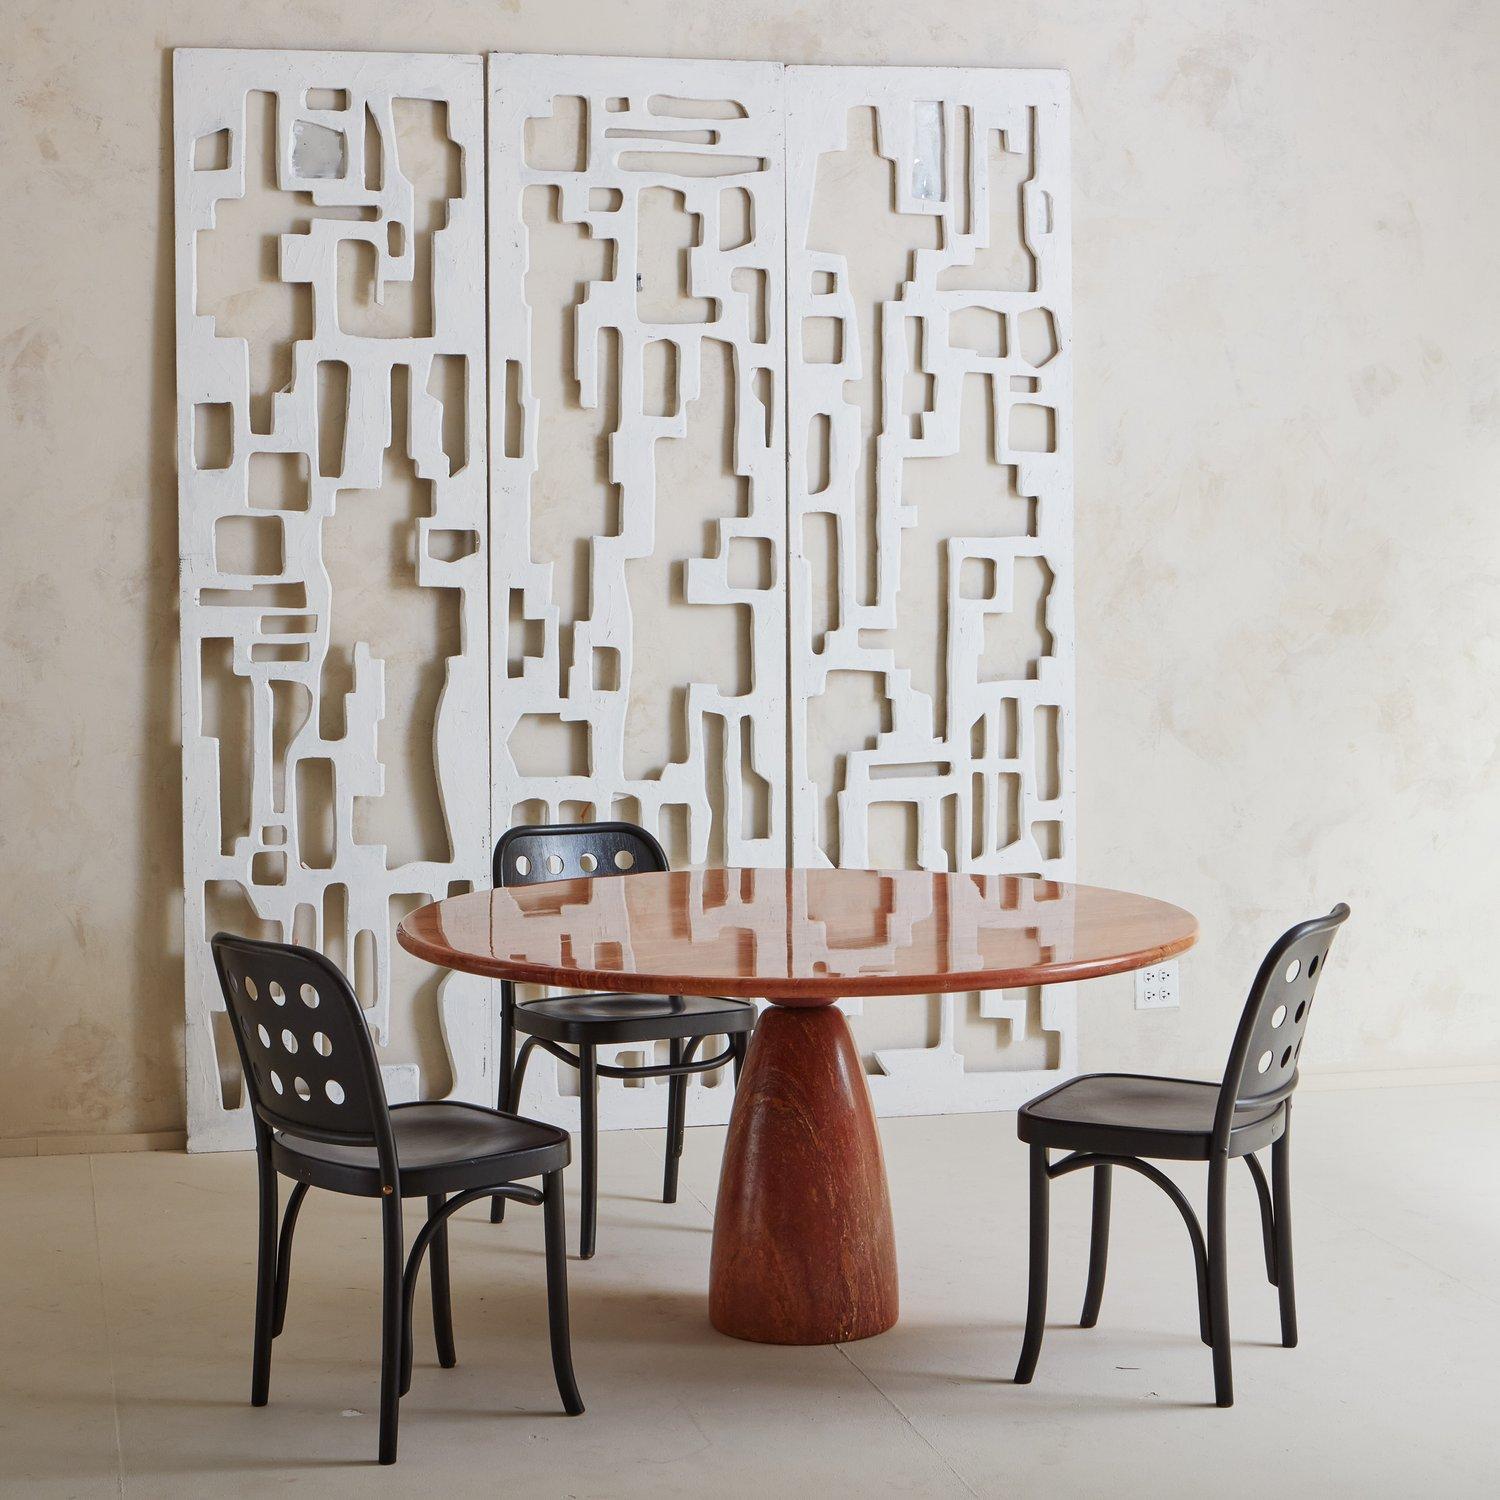 Modern  ‘Finale 1790’ Dining Table in Red Travertine by Peter Draenert, Germany 1970s